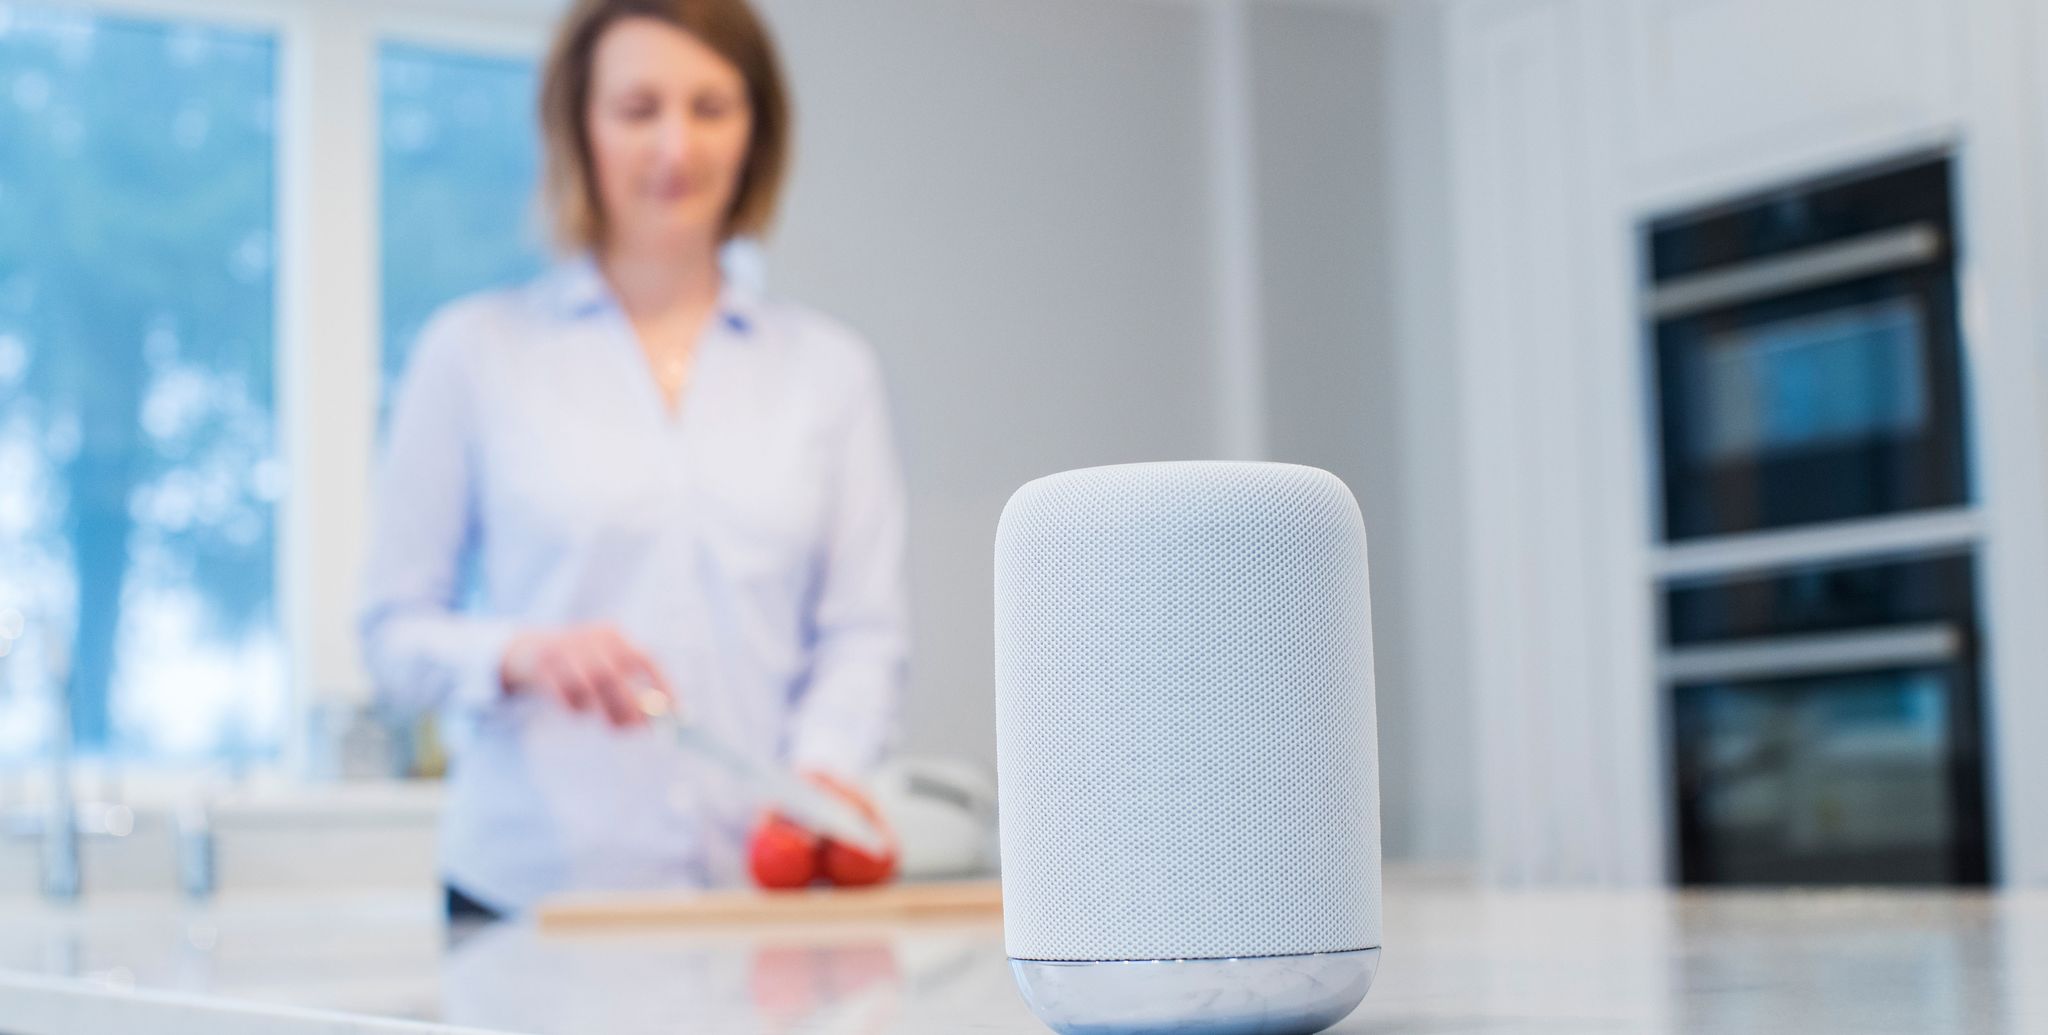 Your smart speaker can answer more than just questions about the weather